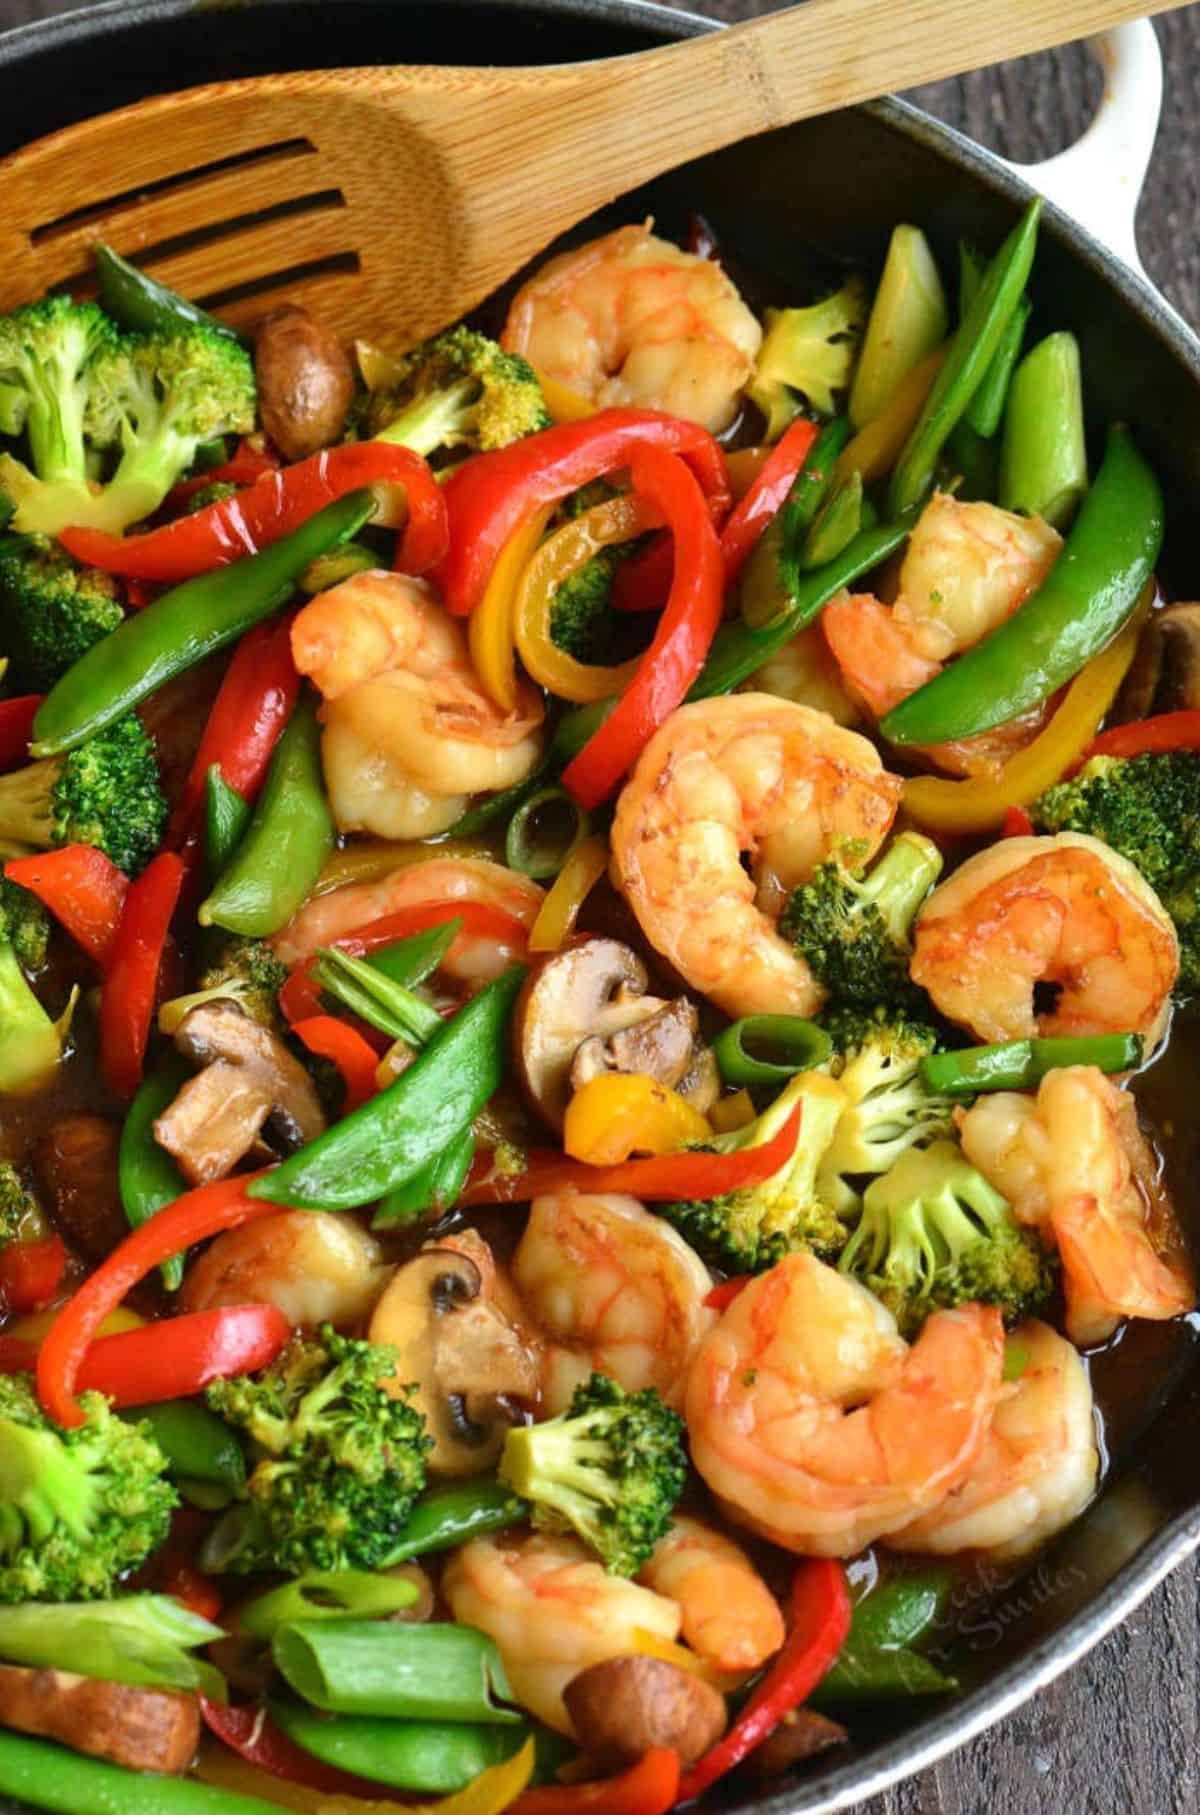 shrimp and lots of vegetables in sauce in a skillet with a wooden spoon.